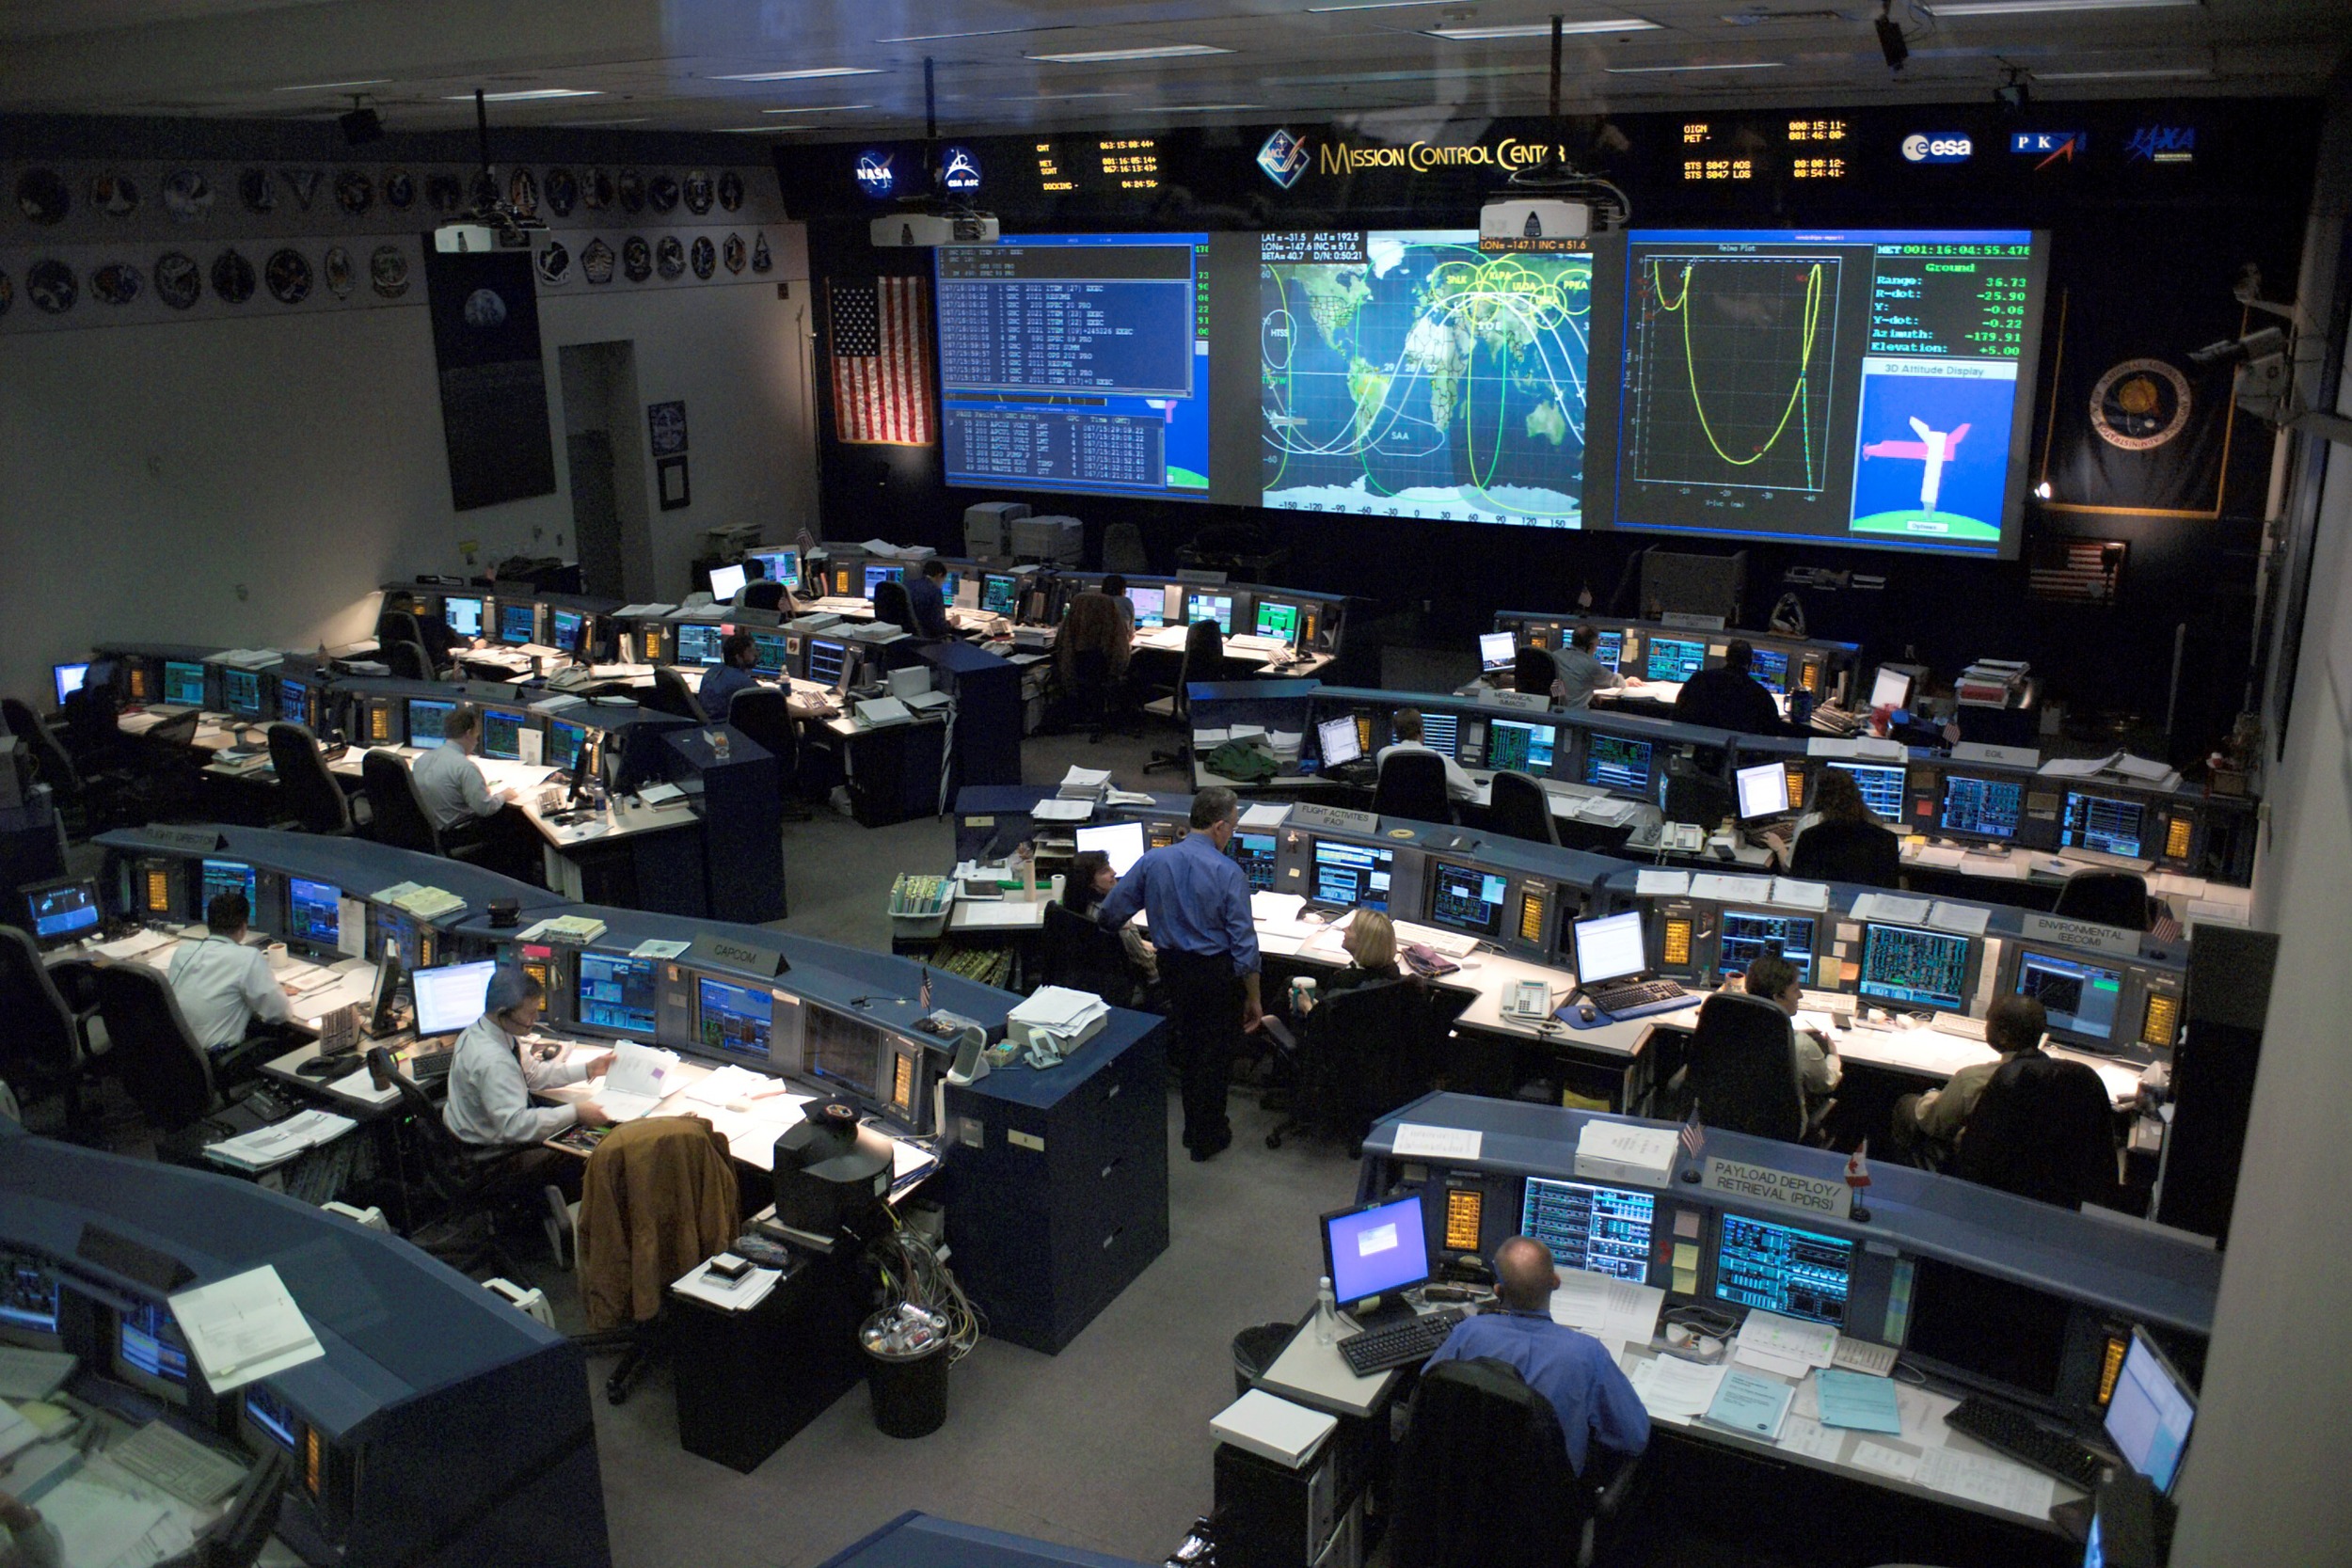 Space Shuttle Control Room